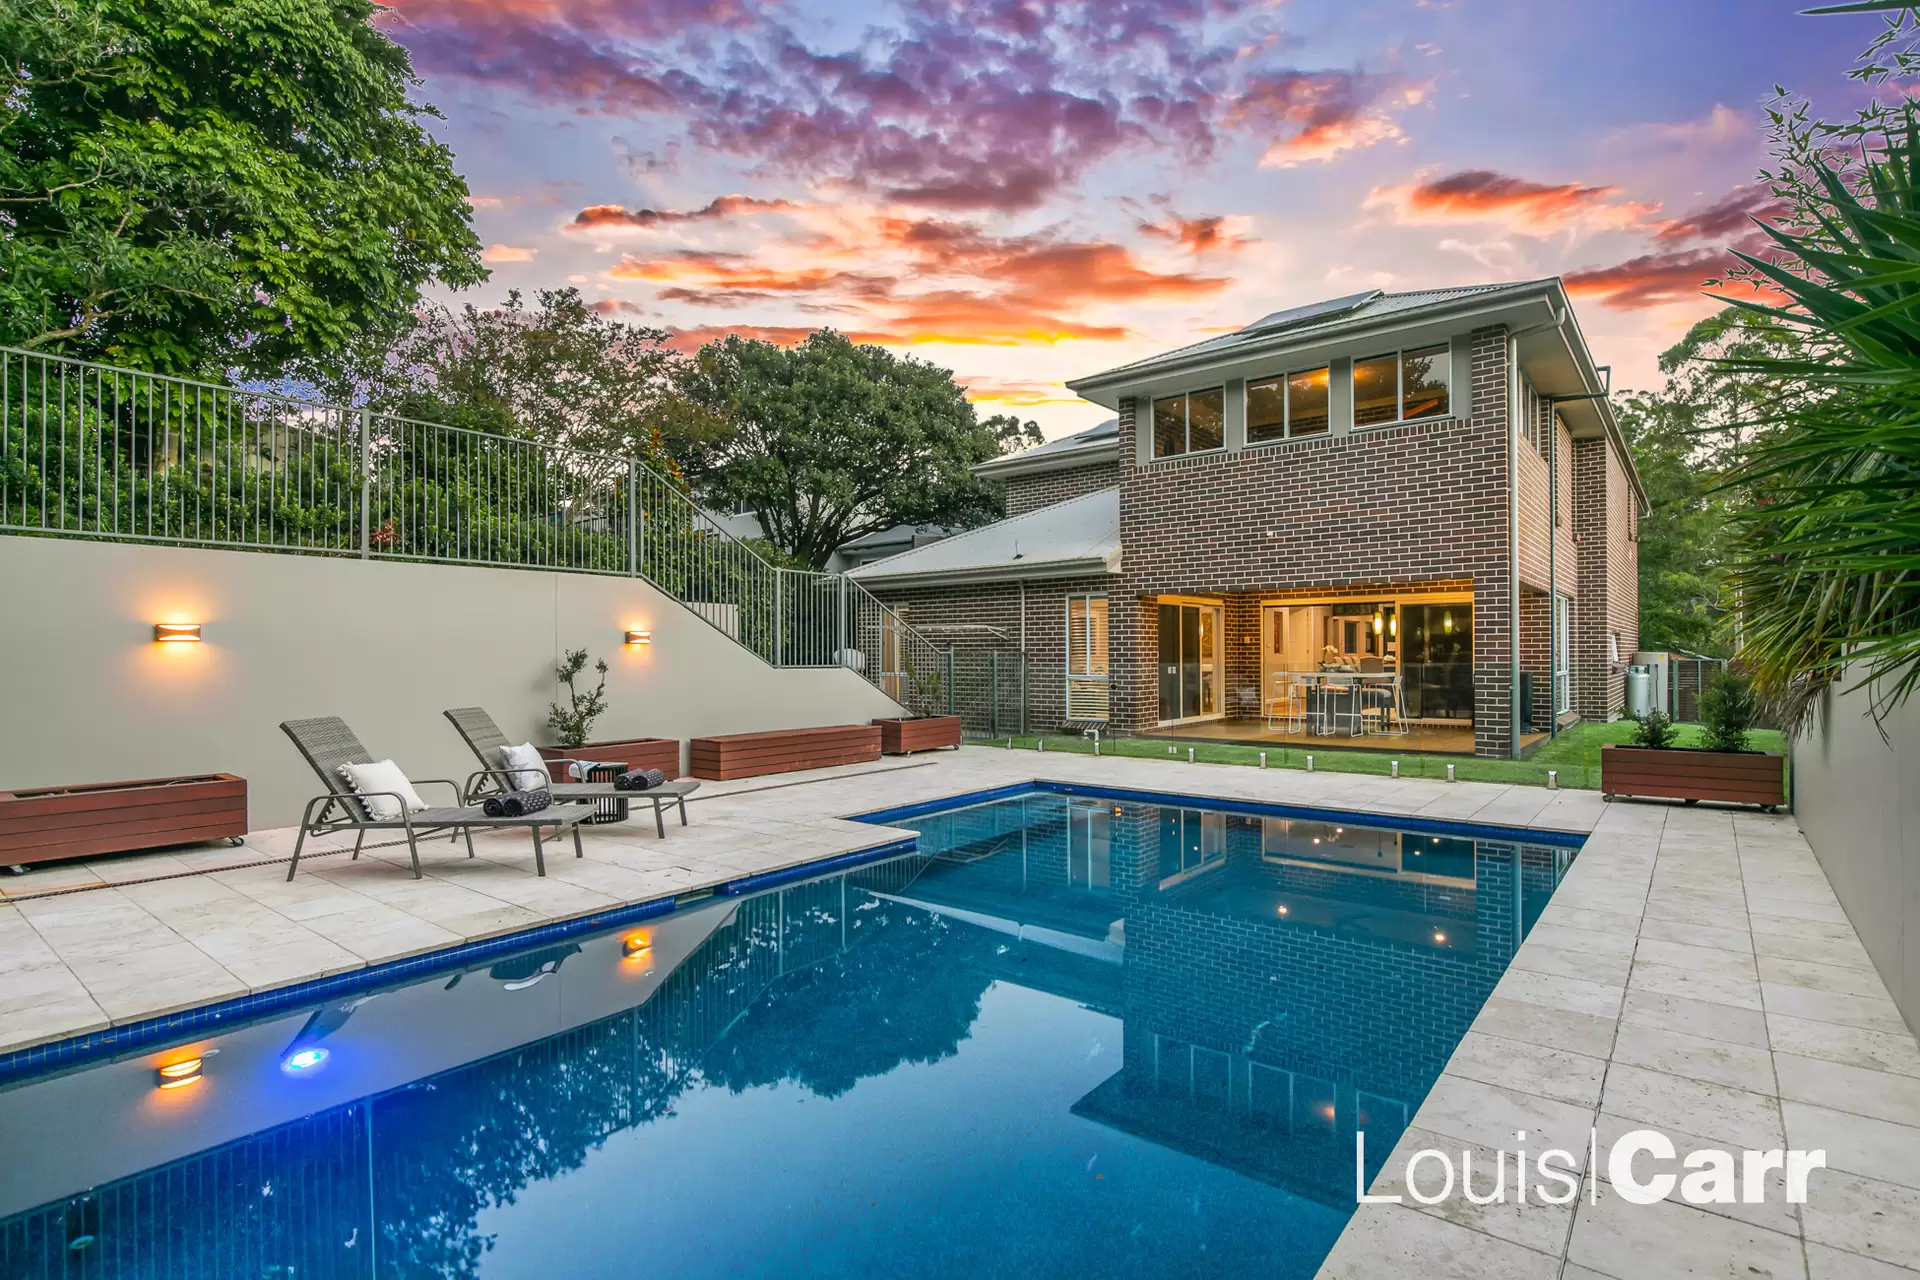 Photo #16: 151 Oratava Avenue, West Pennant Hills - Sold by Louis Carr Real Estate